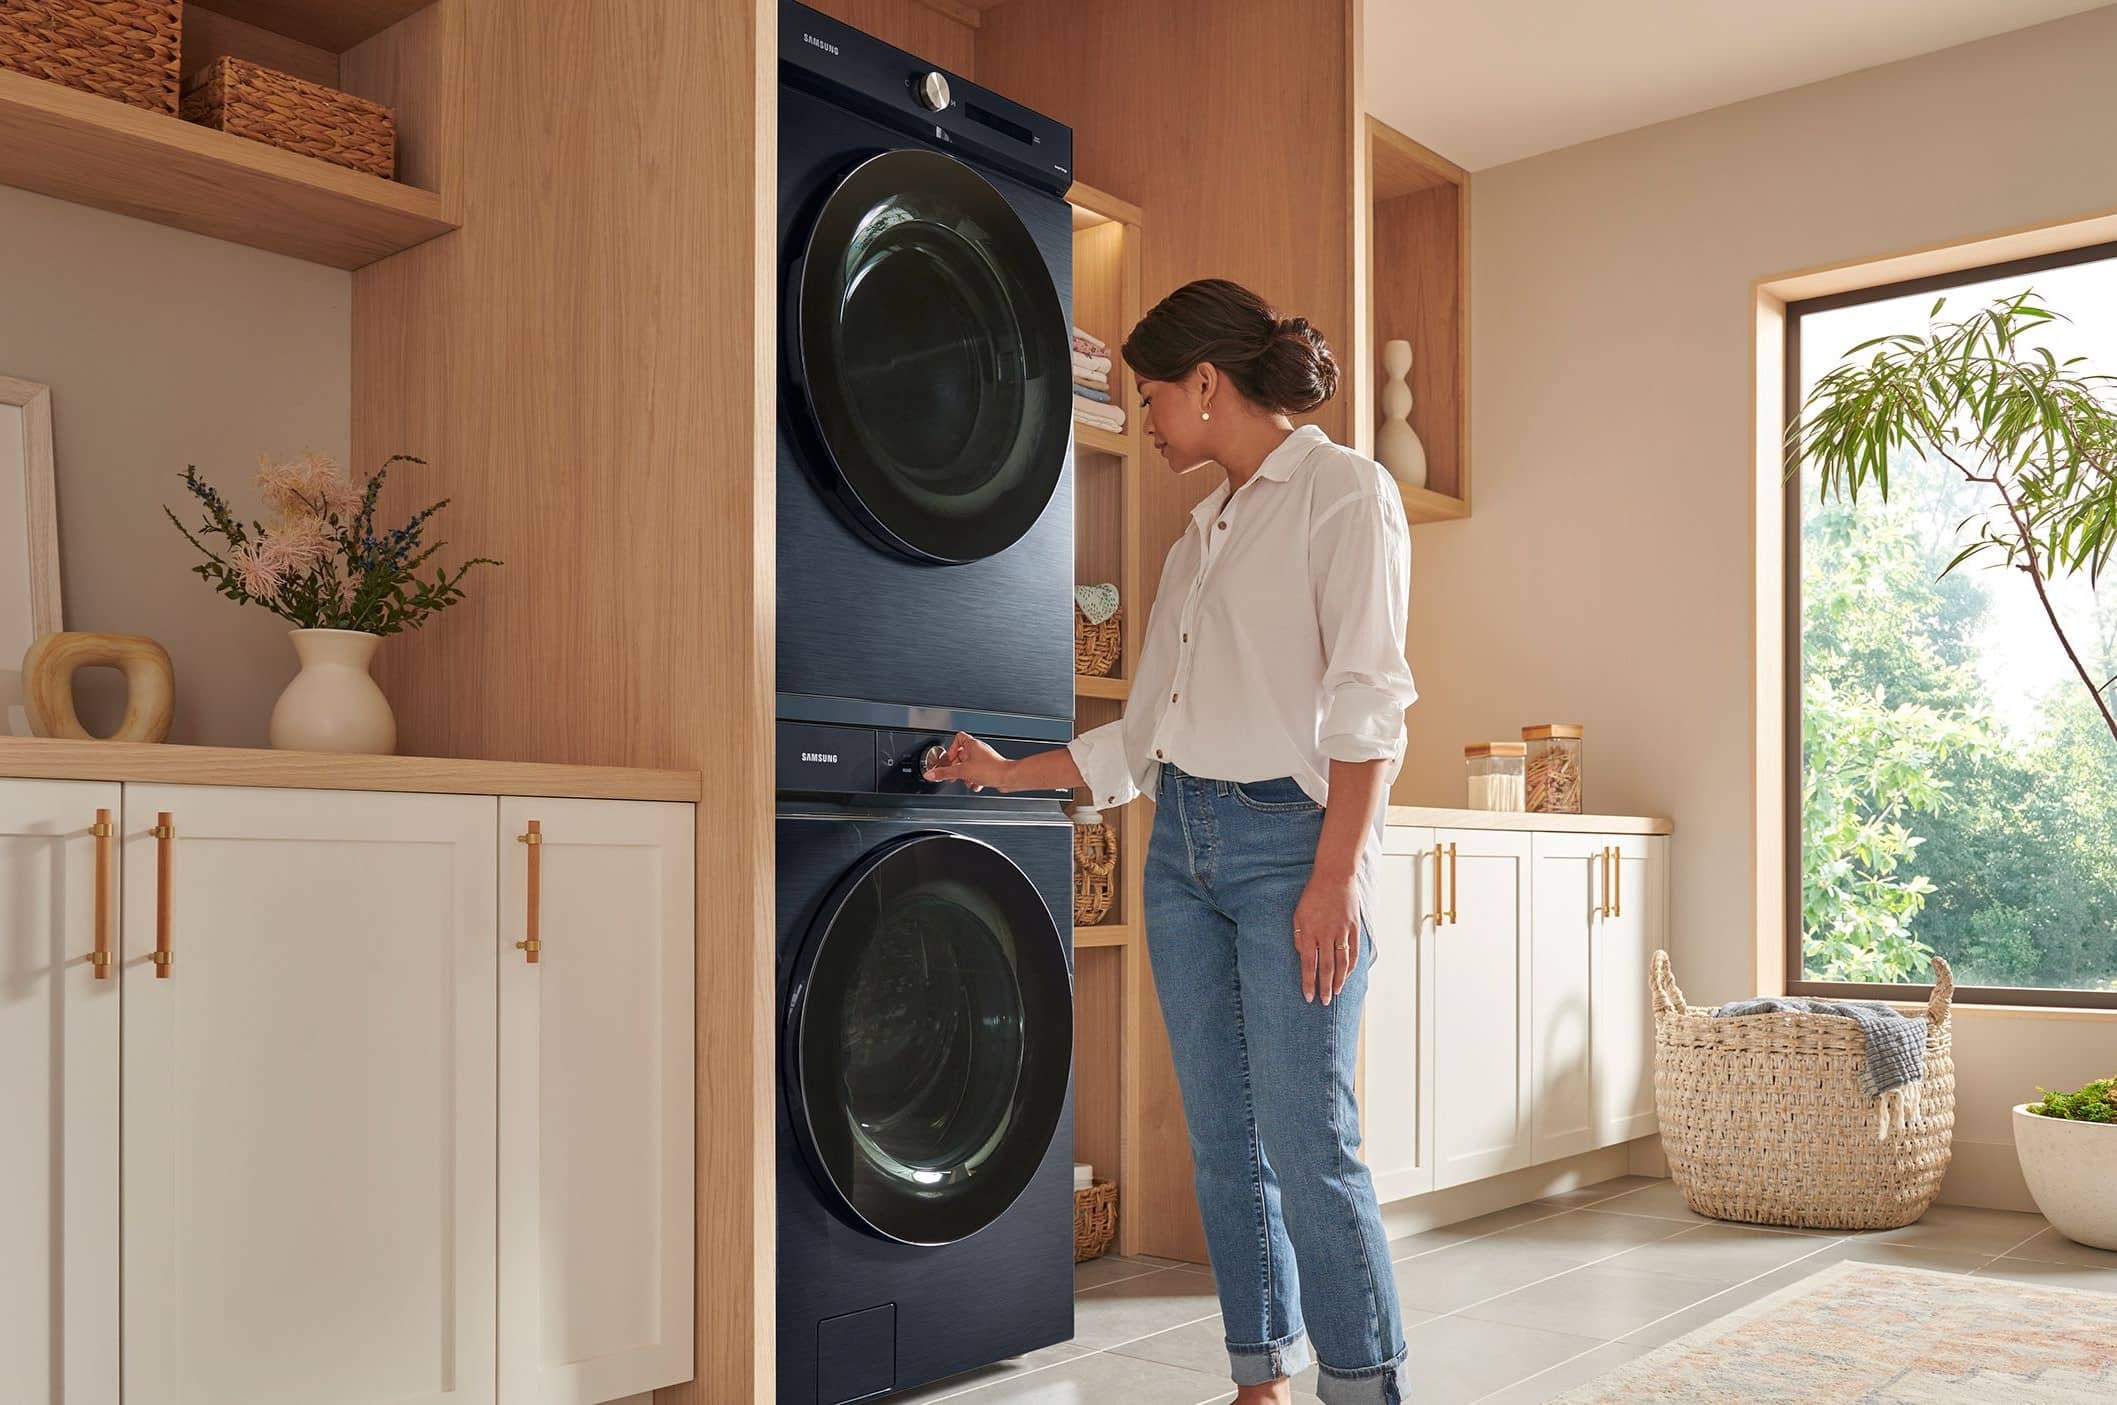 How To Operate A Samsung Washing Machine